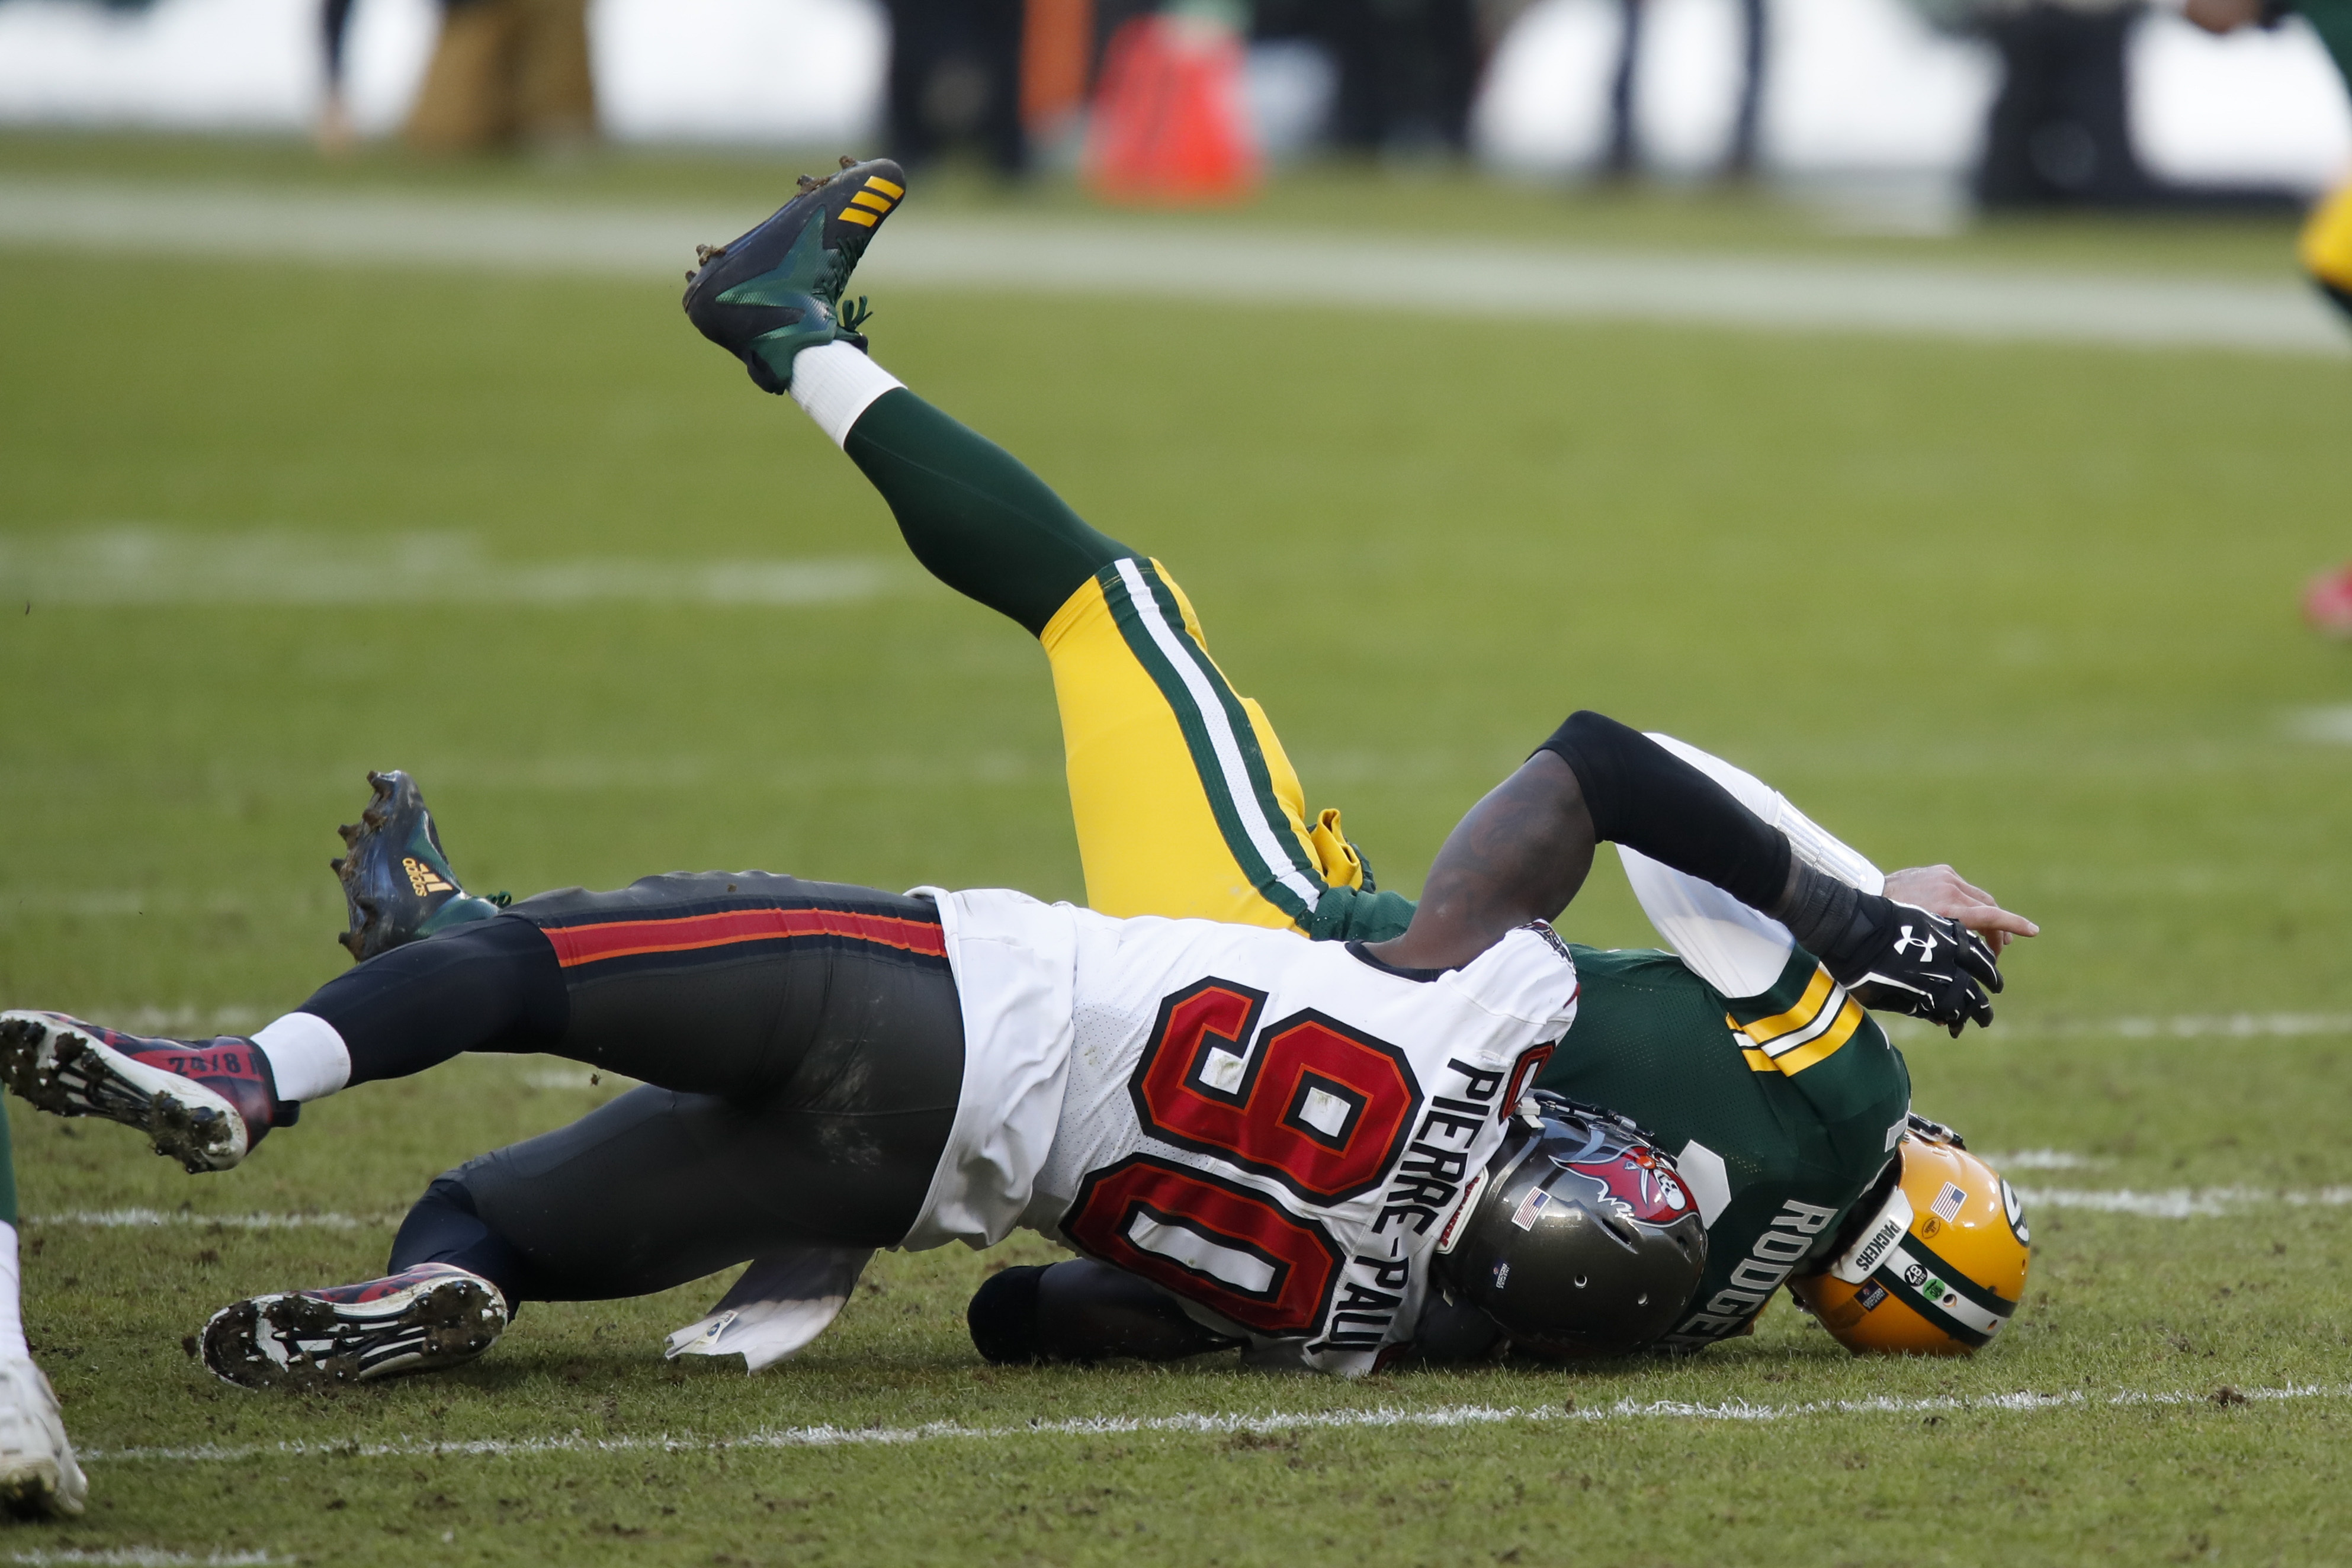 Game Recap: Packers Fall to Bucs 31-26 in NFC Championship Game